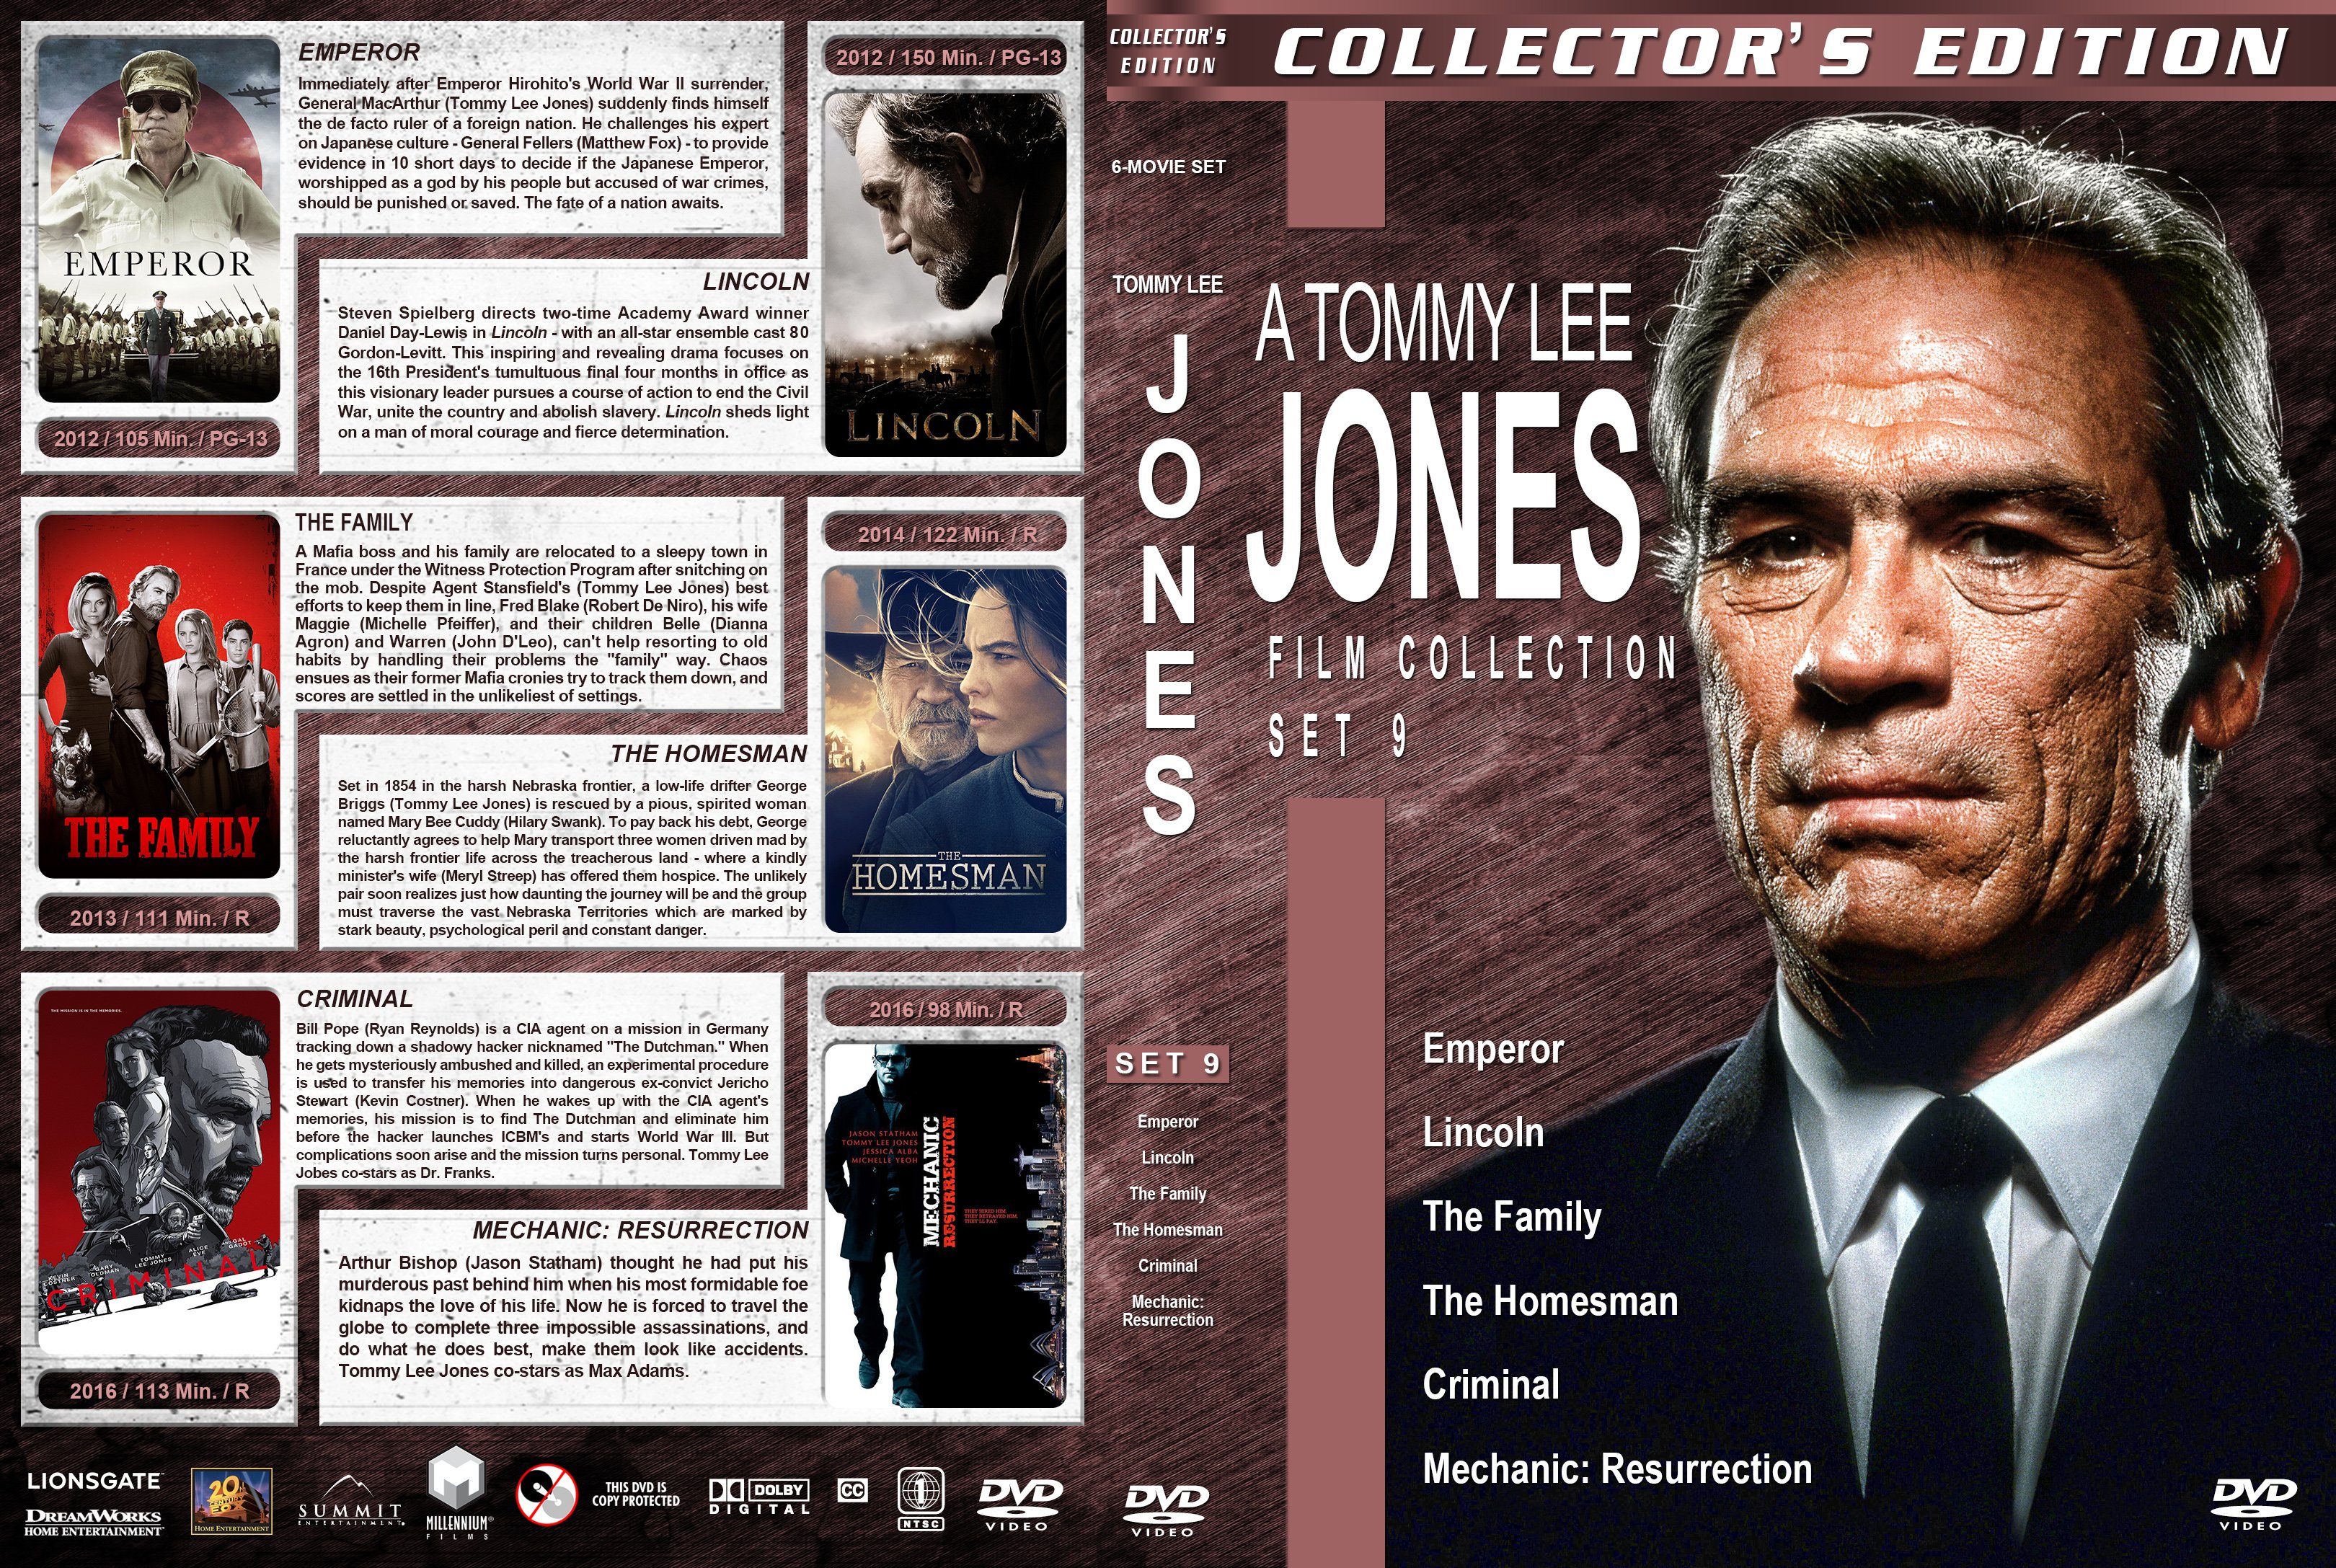 Tommy Lee Jones Film Collection - Set 9 (-2016) Cover.